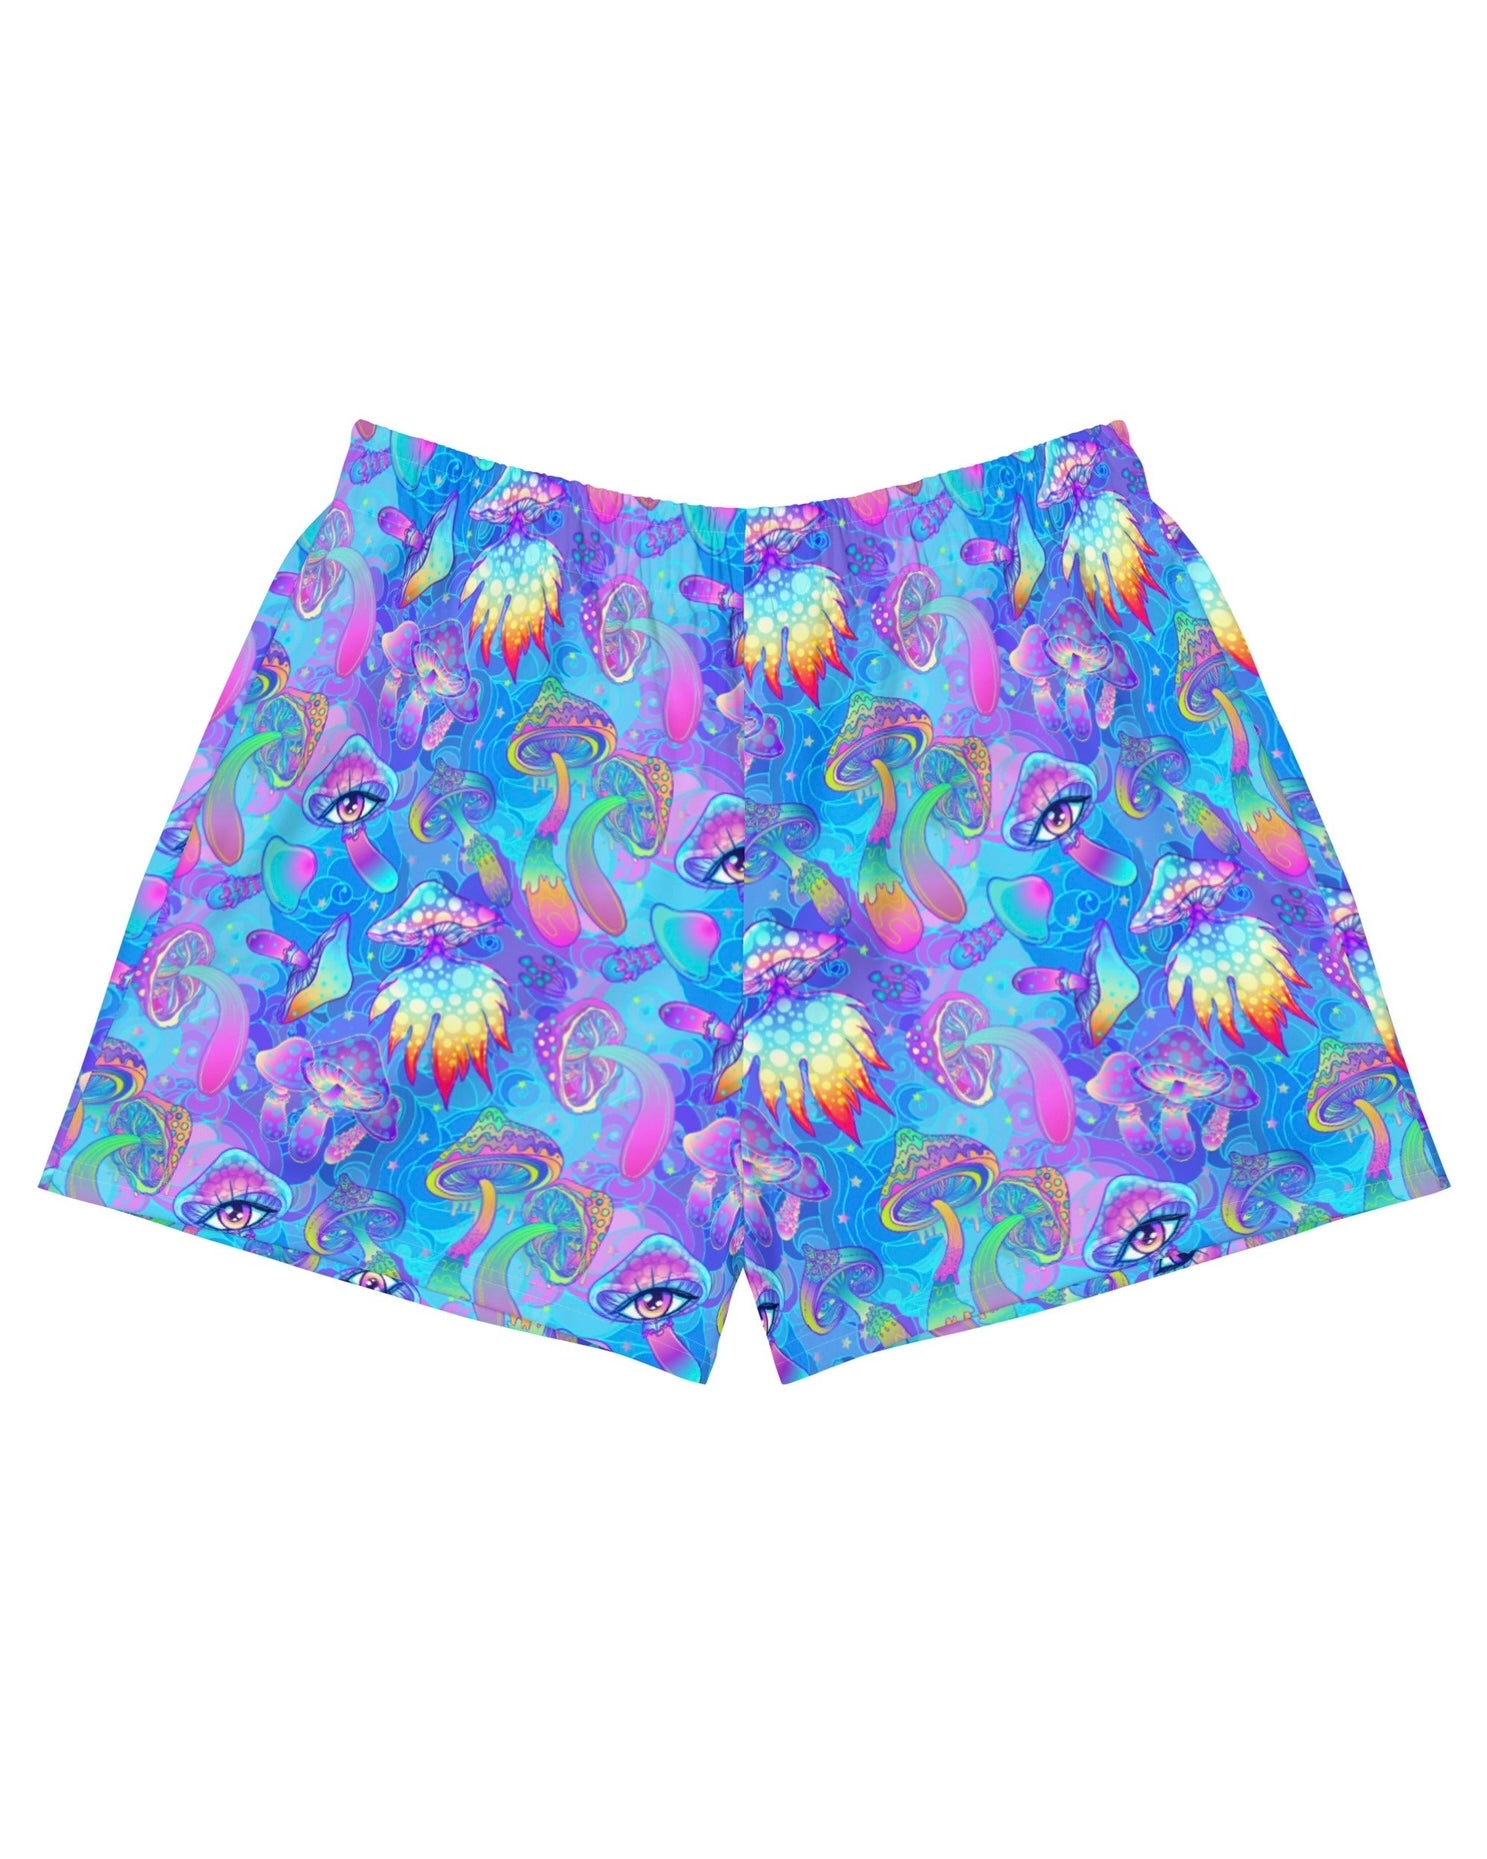 Shroomin Blue Recycled Shorts, Athletic Shorts, - One Stop Rave